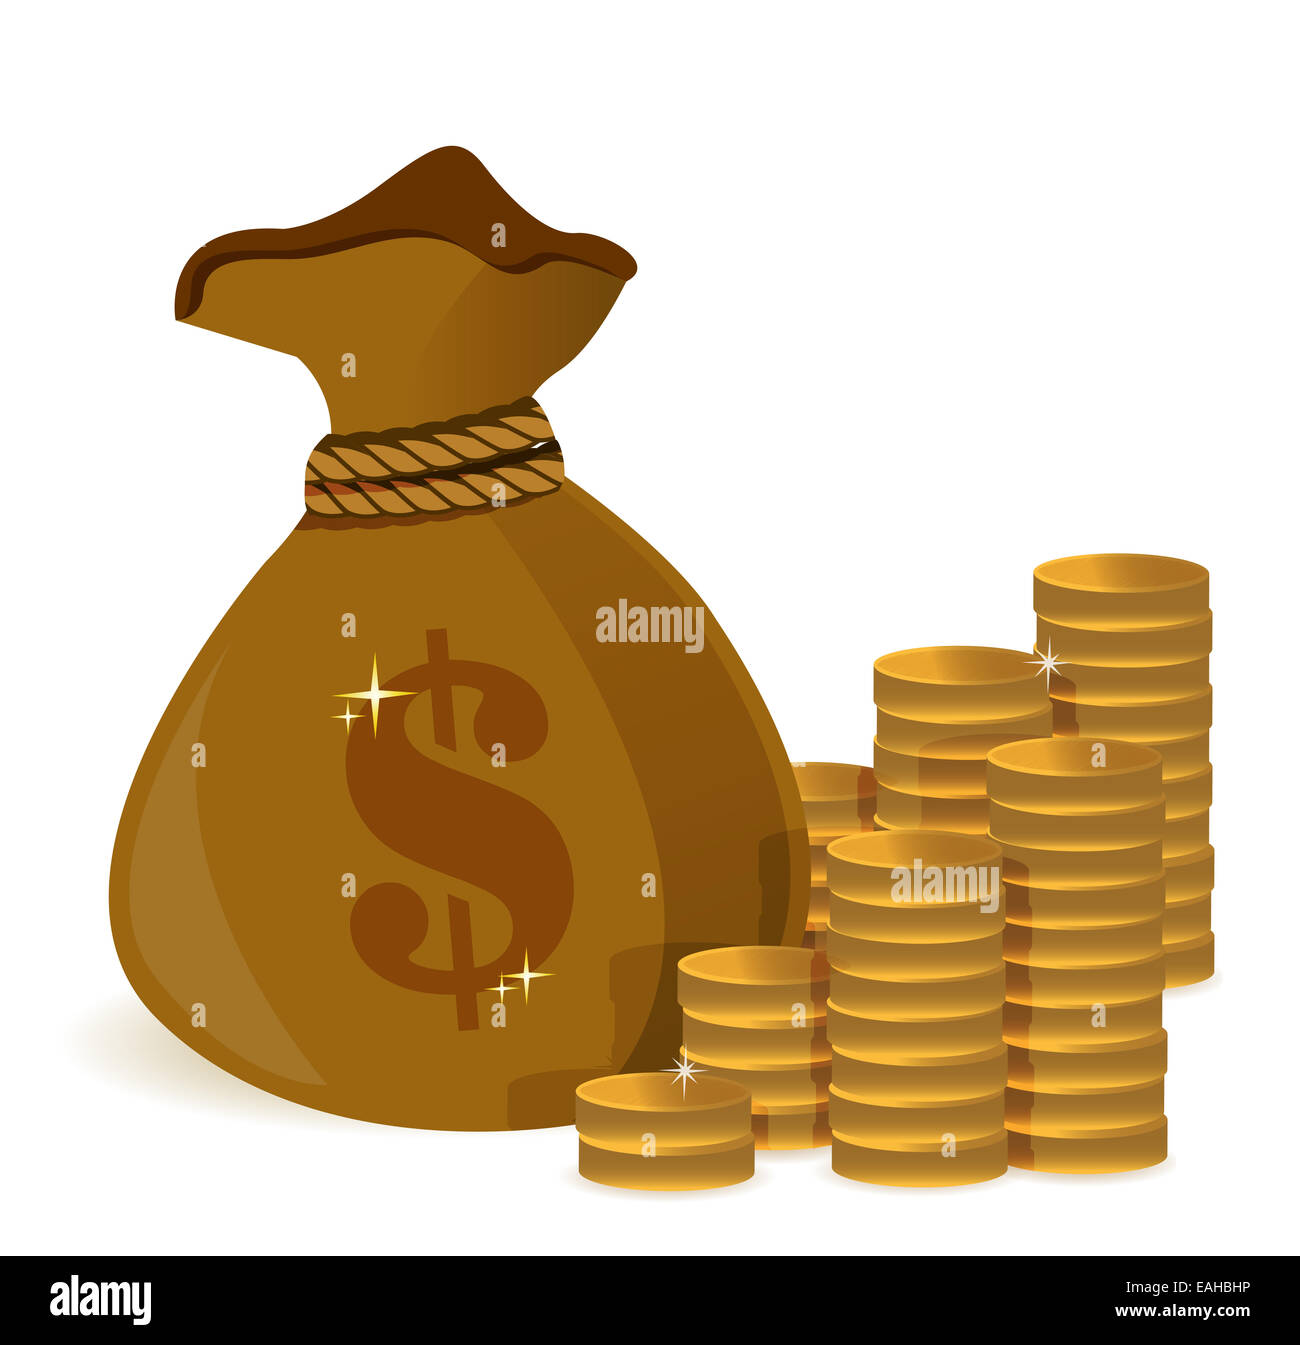 Money bags and gold coins Stock Photo - Alamy